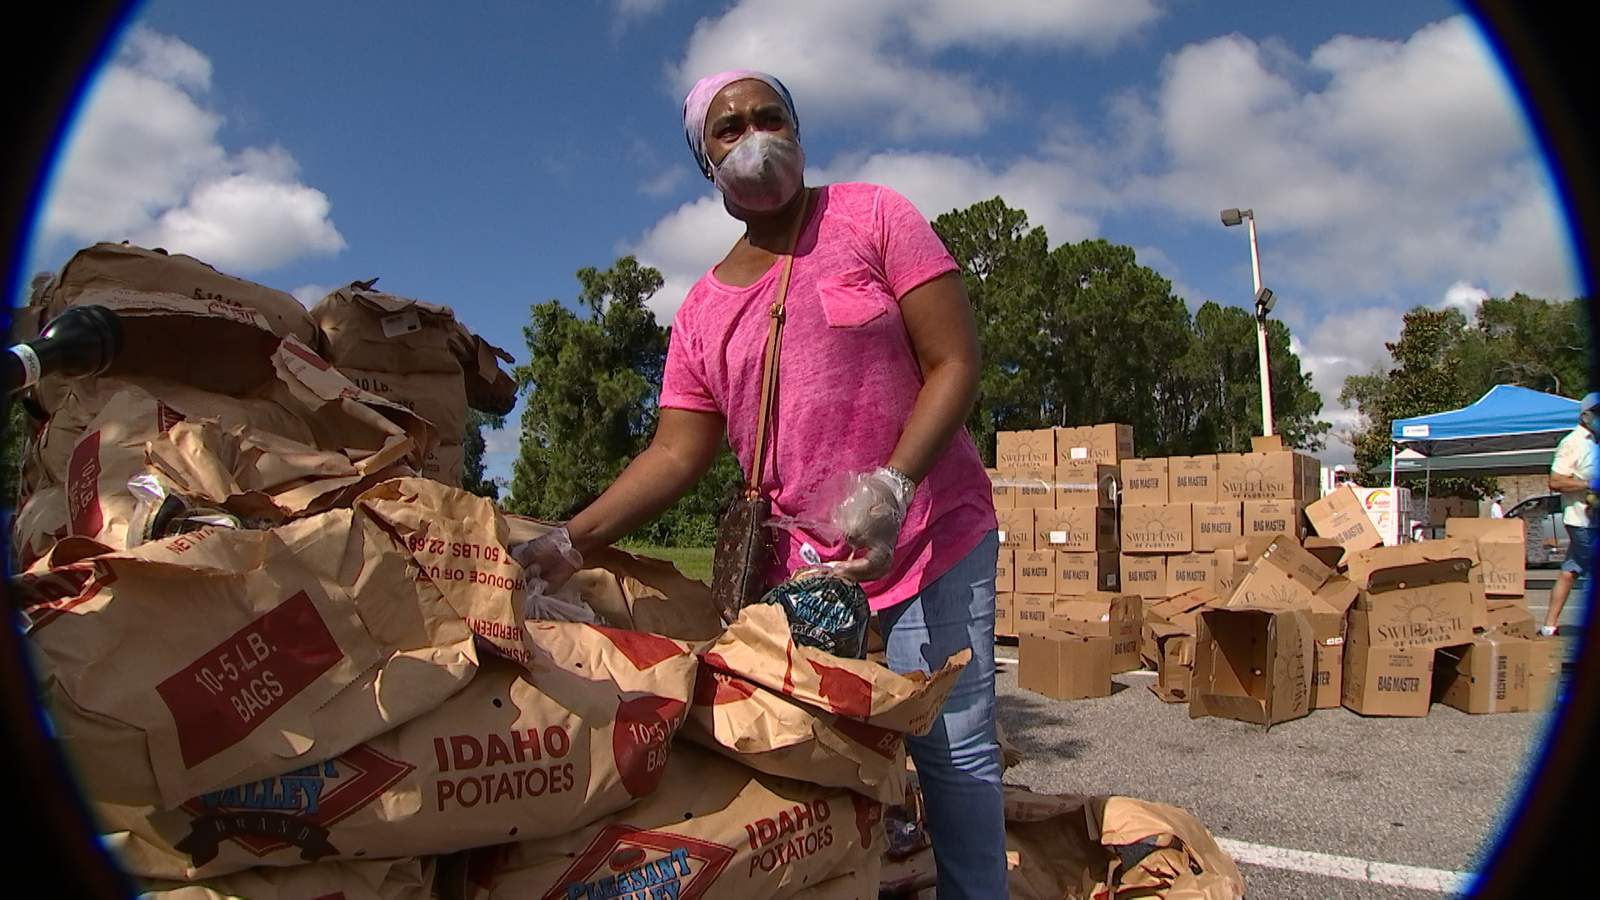 Herald Of Hope food pantry provides much-needed groceries in West Orange County